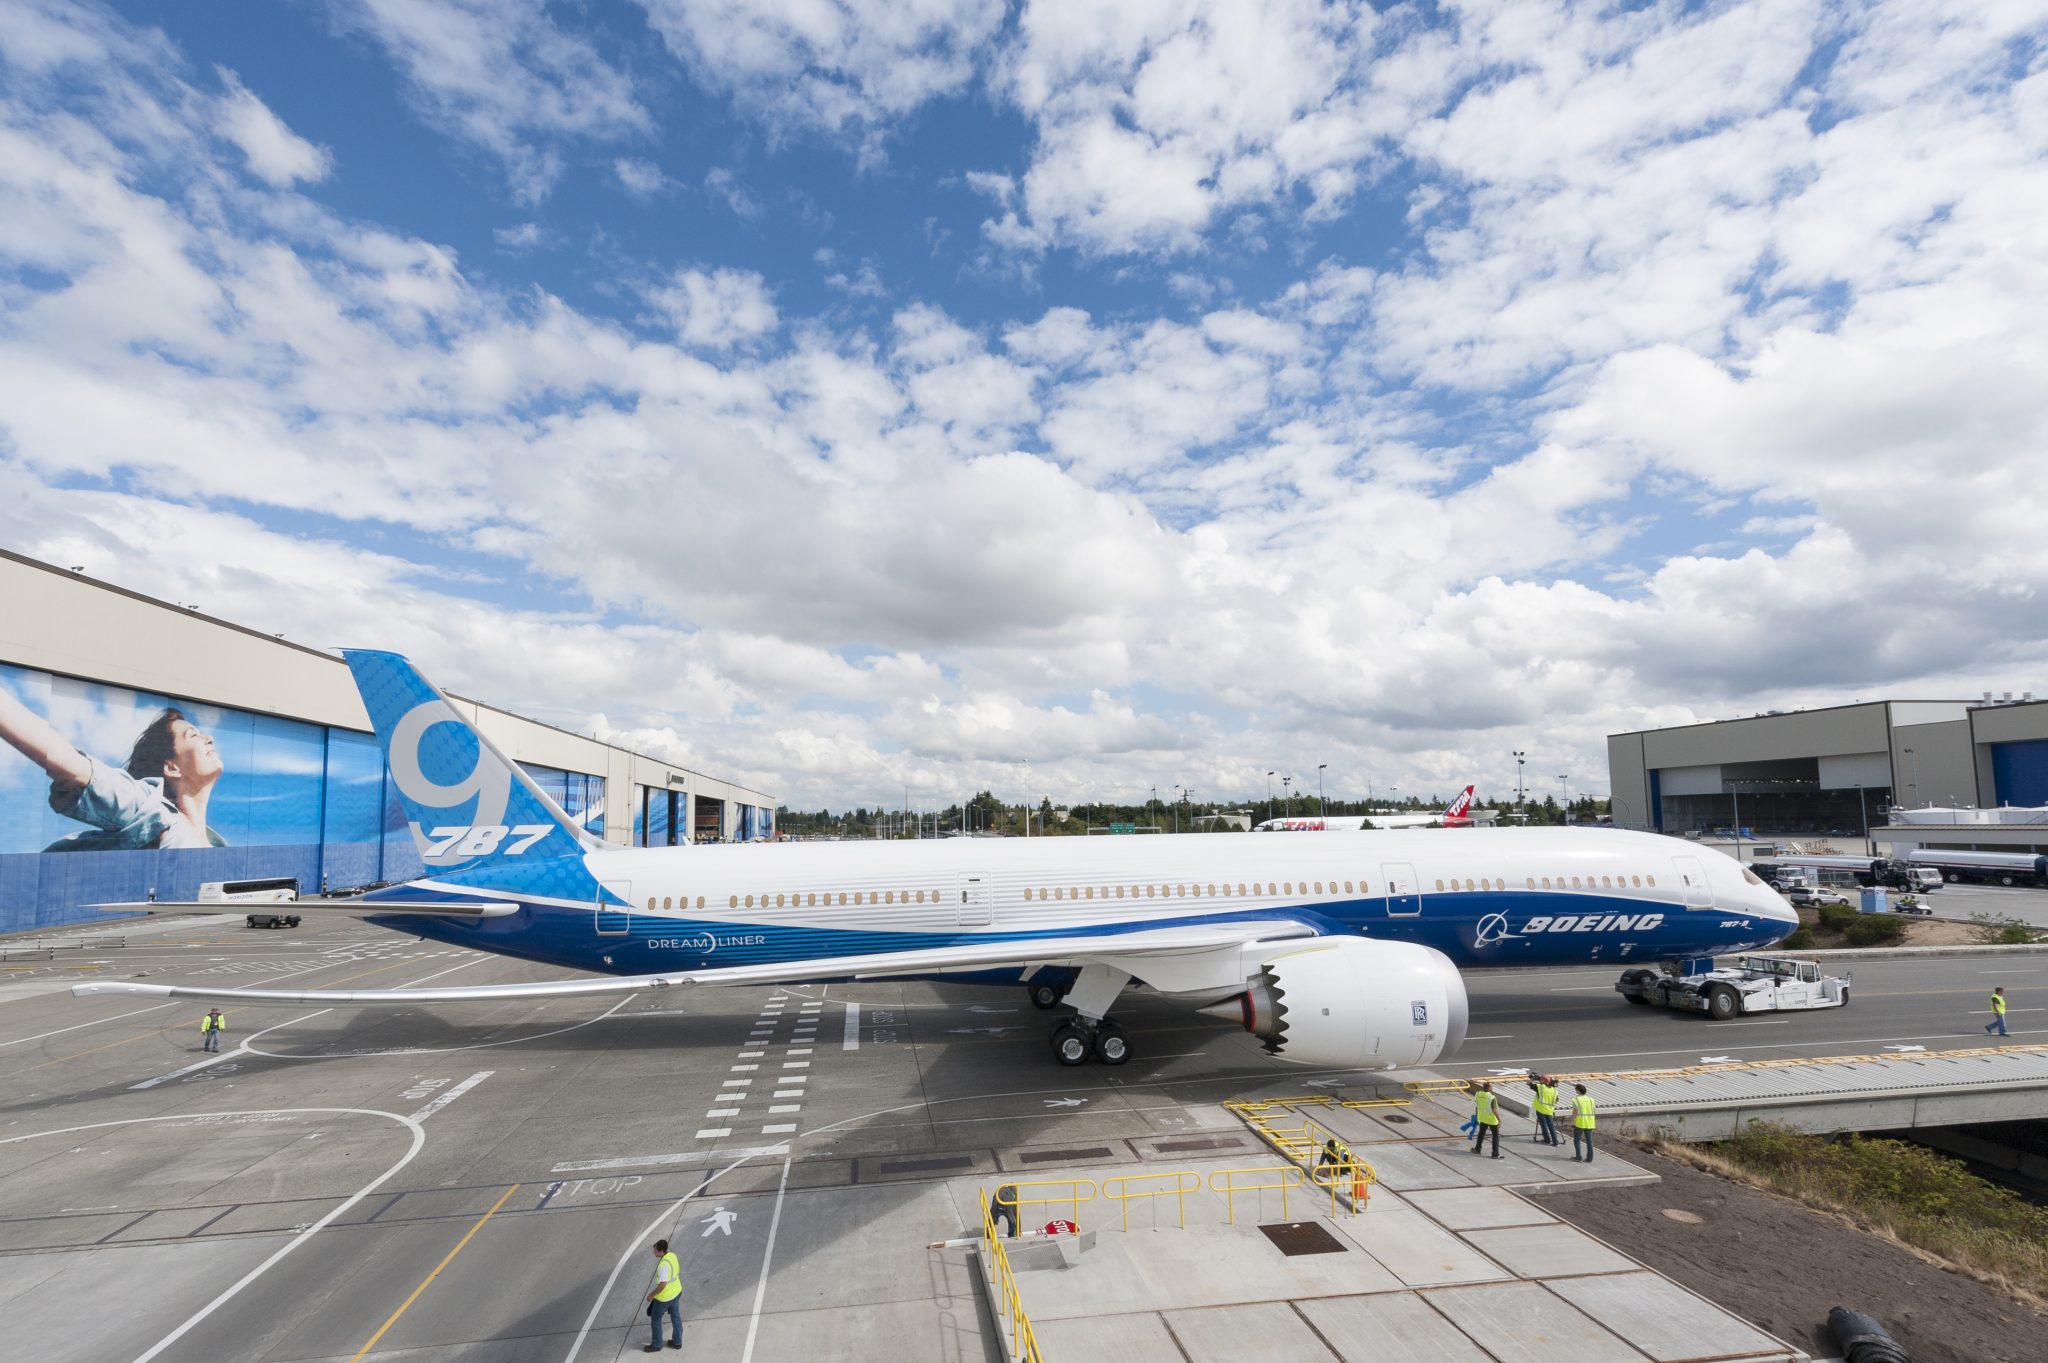 Boeing delivers first 787-9 Dreamliner to Juneyao Airlines